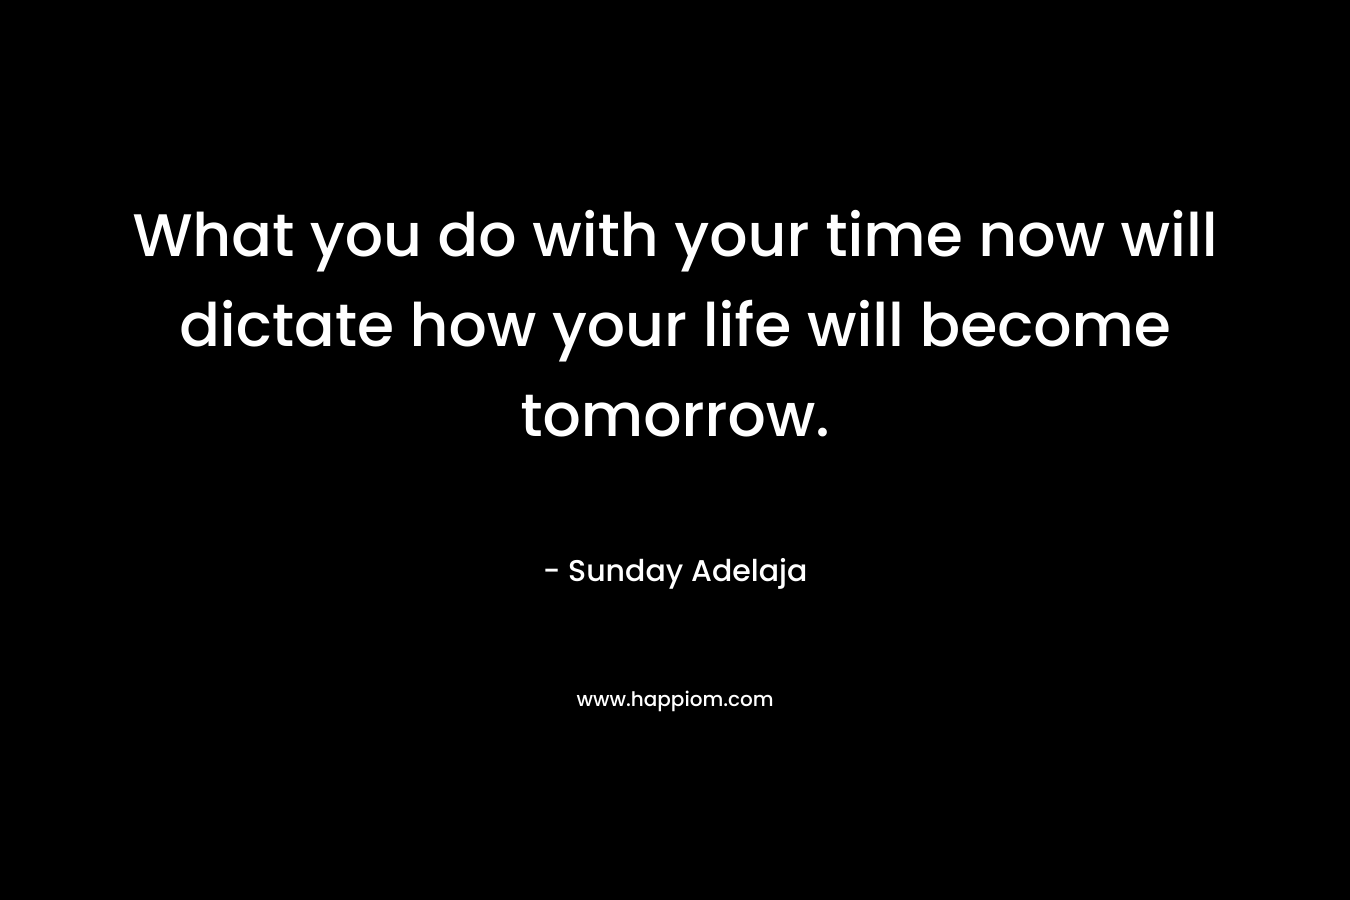 What you do with your time now will dictate how your life will become tomorrow.